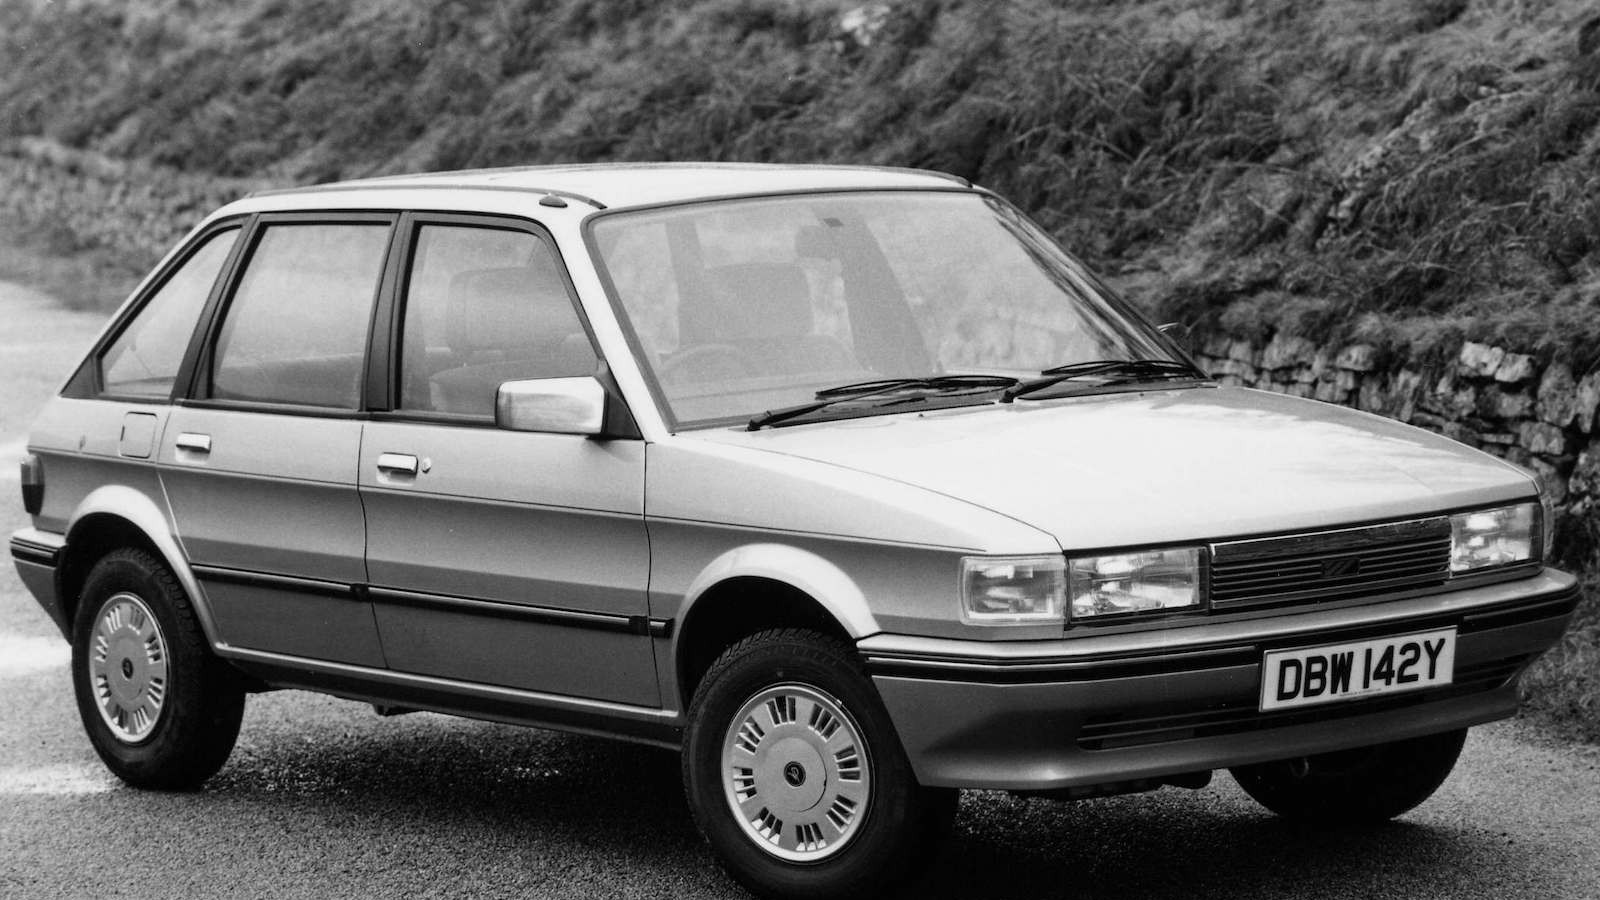 25 of 1983's most memorable new cars